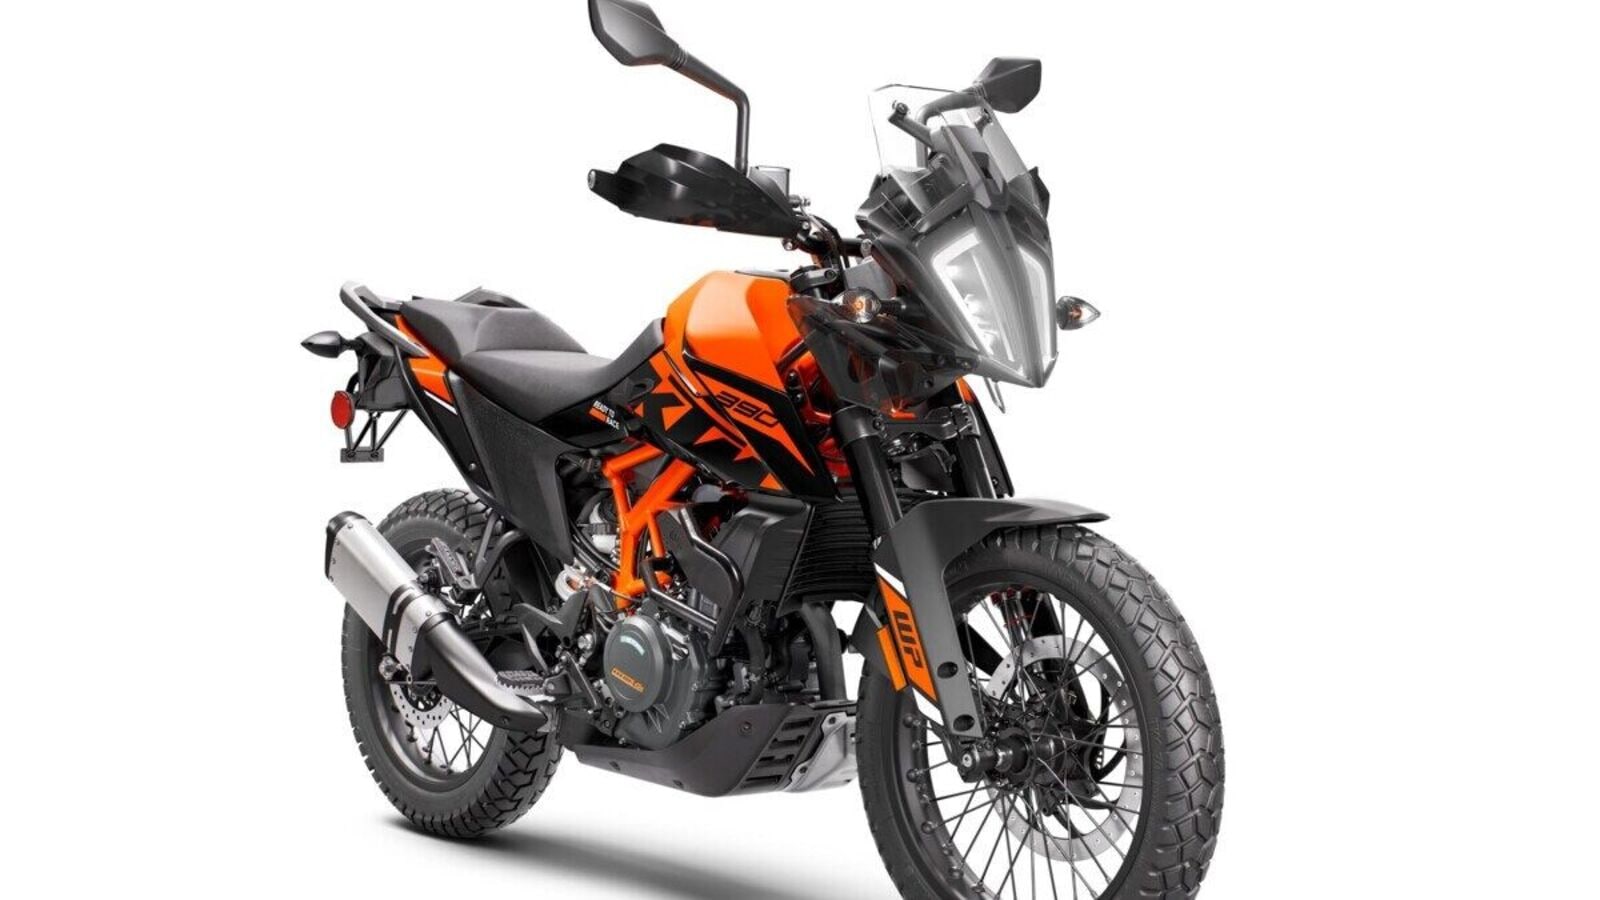 2023 KTM 390 Adventure priced at Rs 3.6 lakh; gets fully adjustable